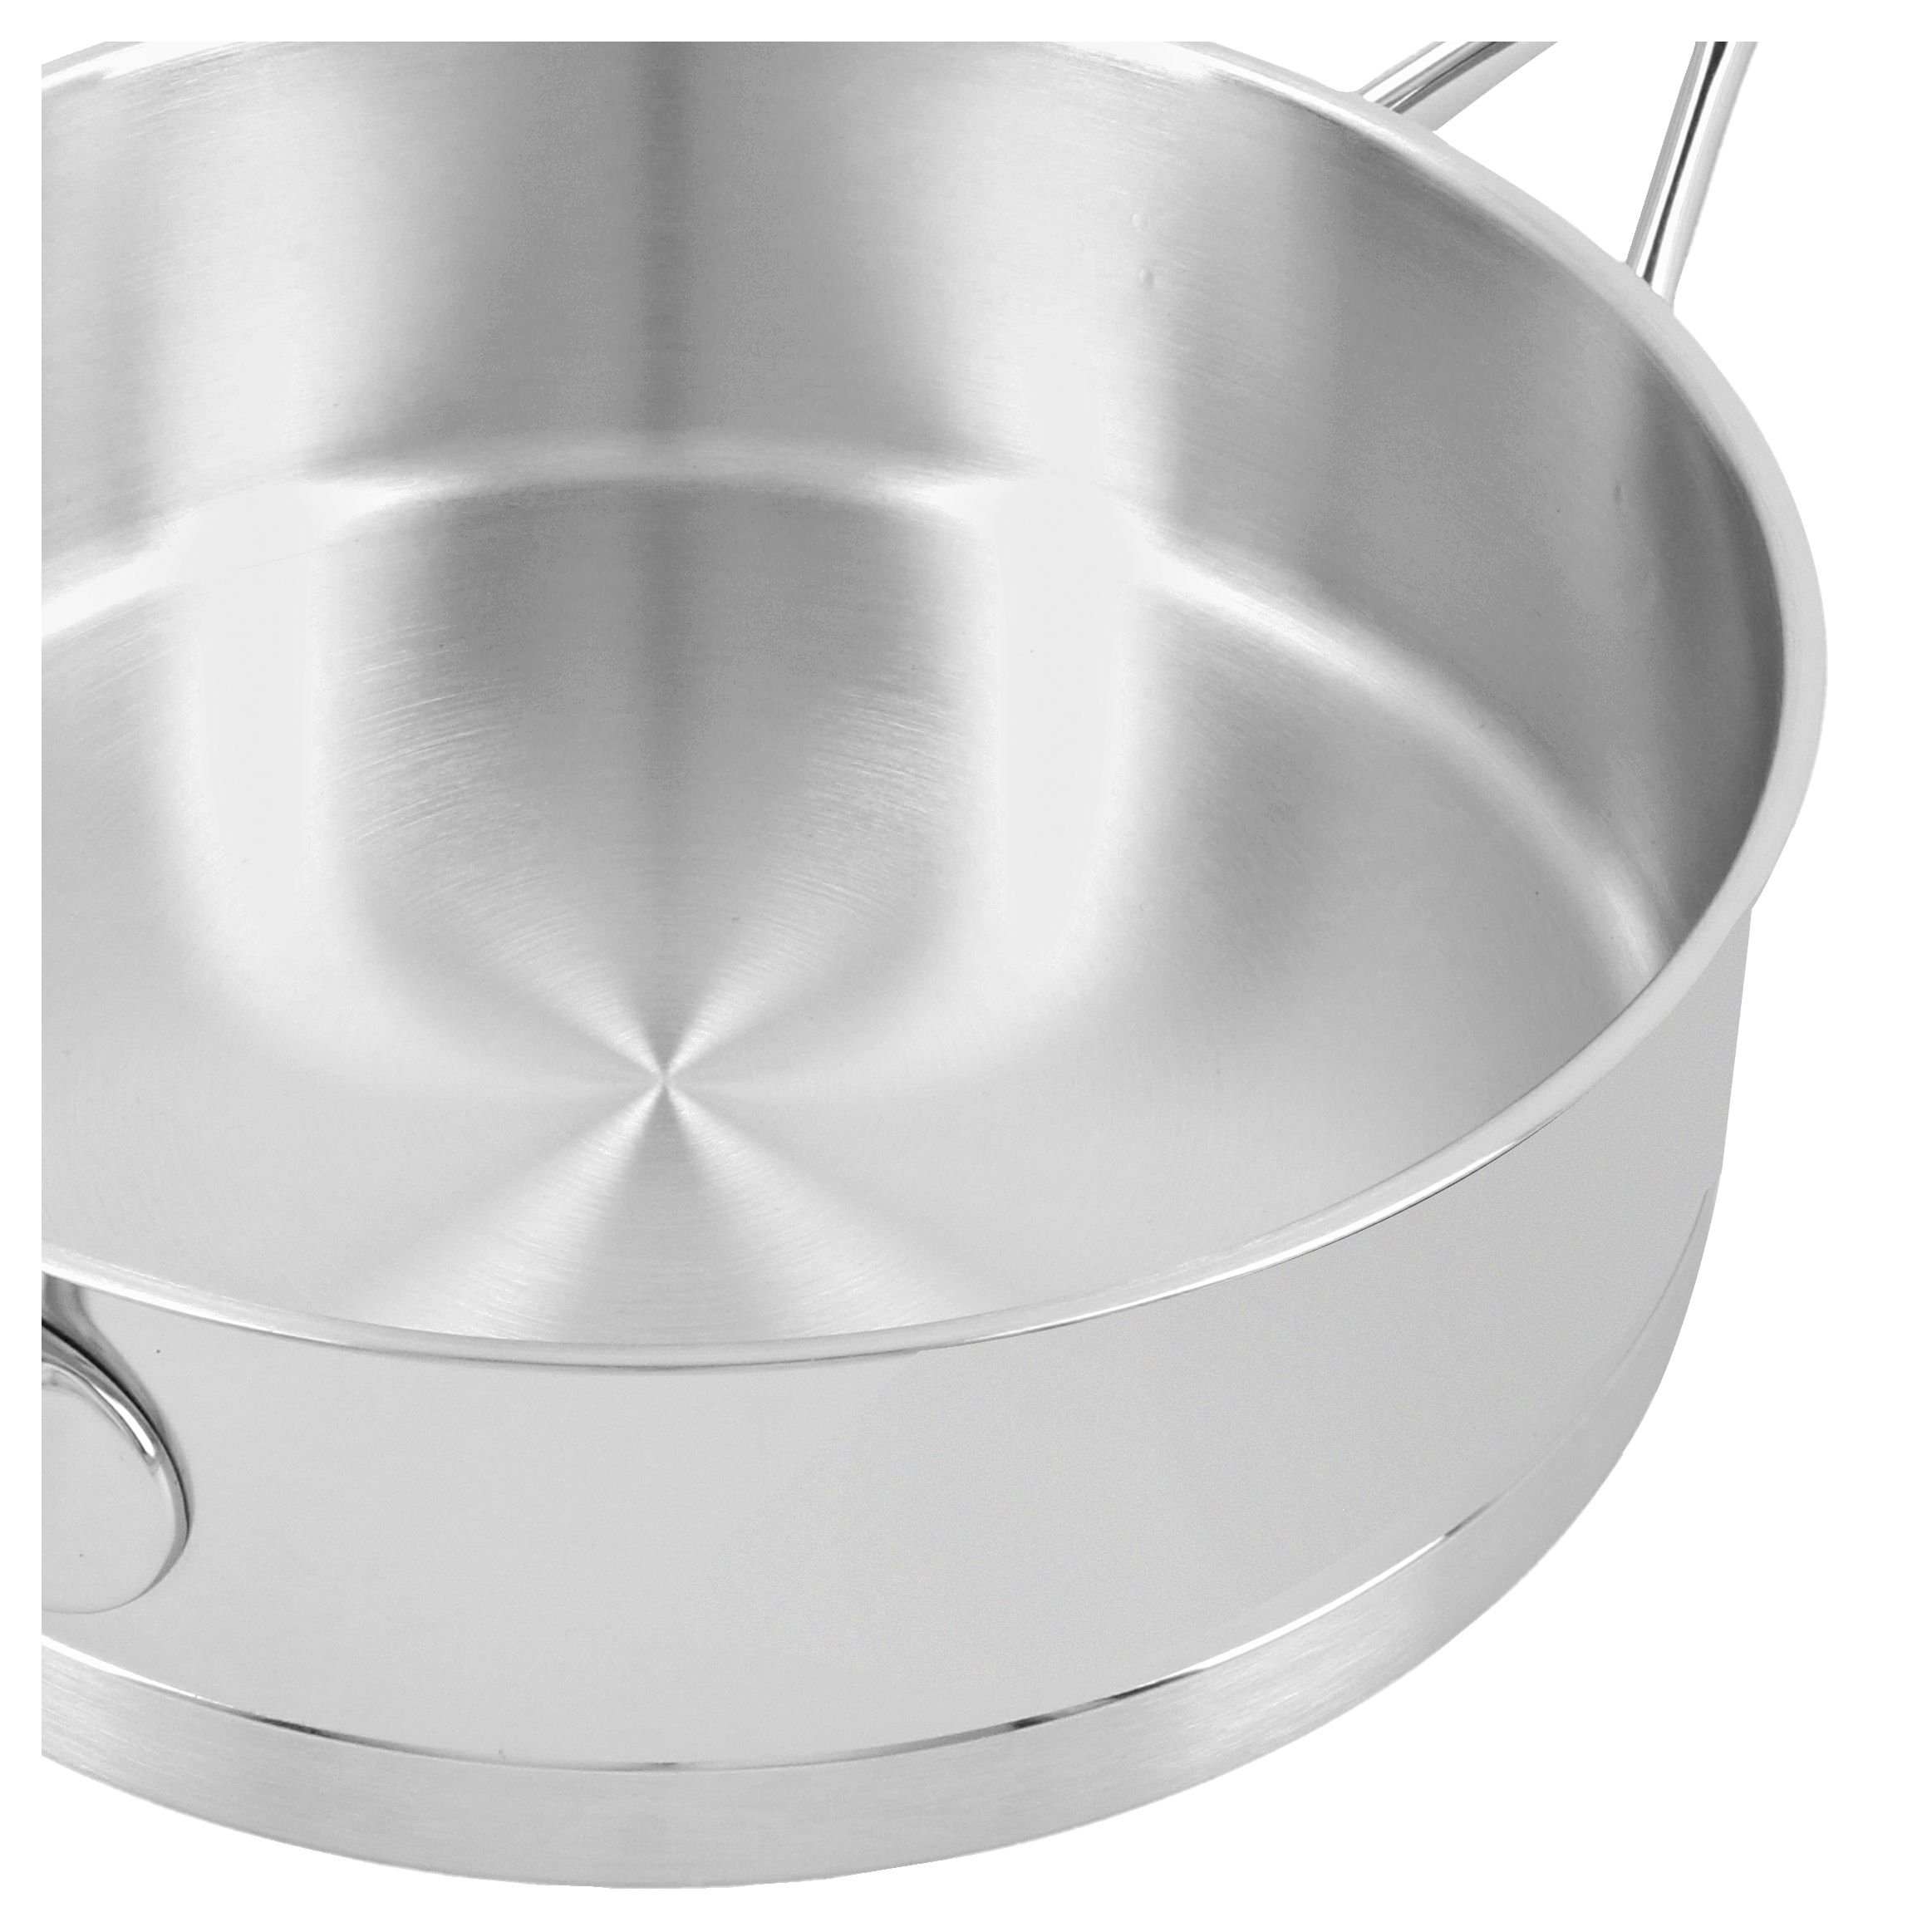 Demeyere Silver7 Covered Saute Pan - 60424A-60524, Silver